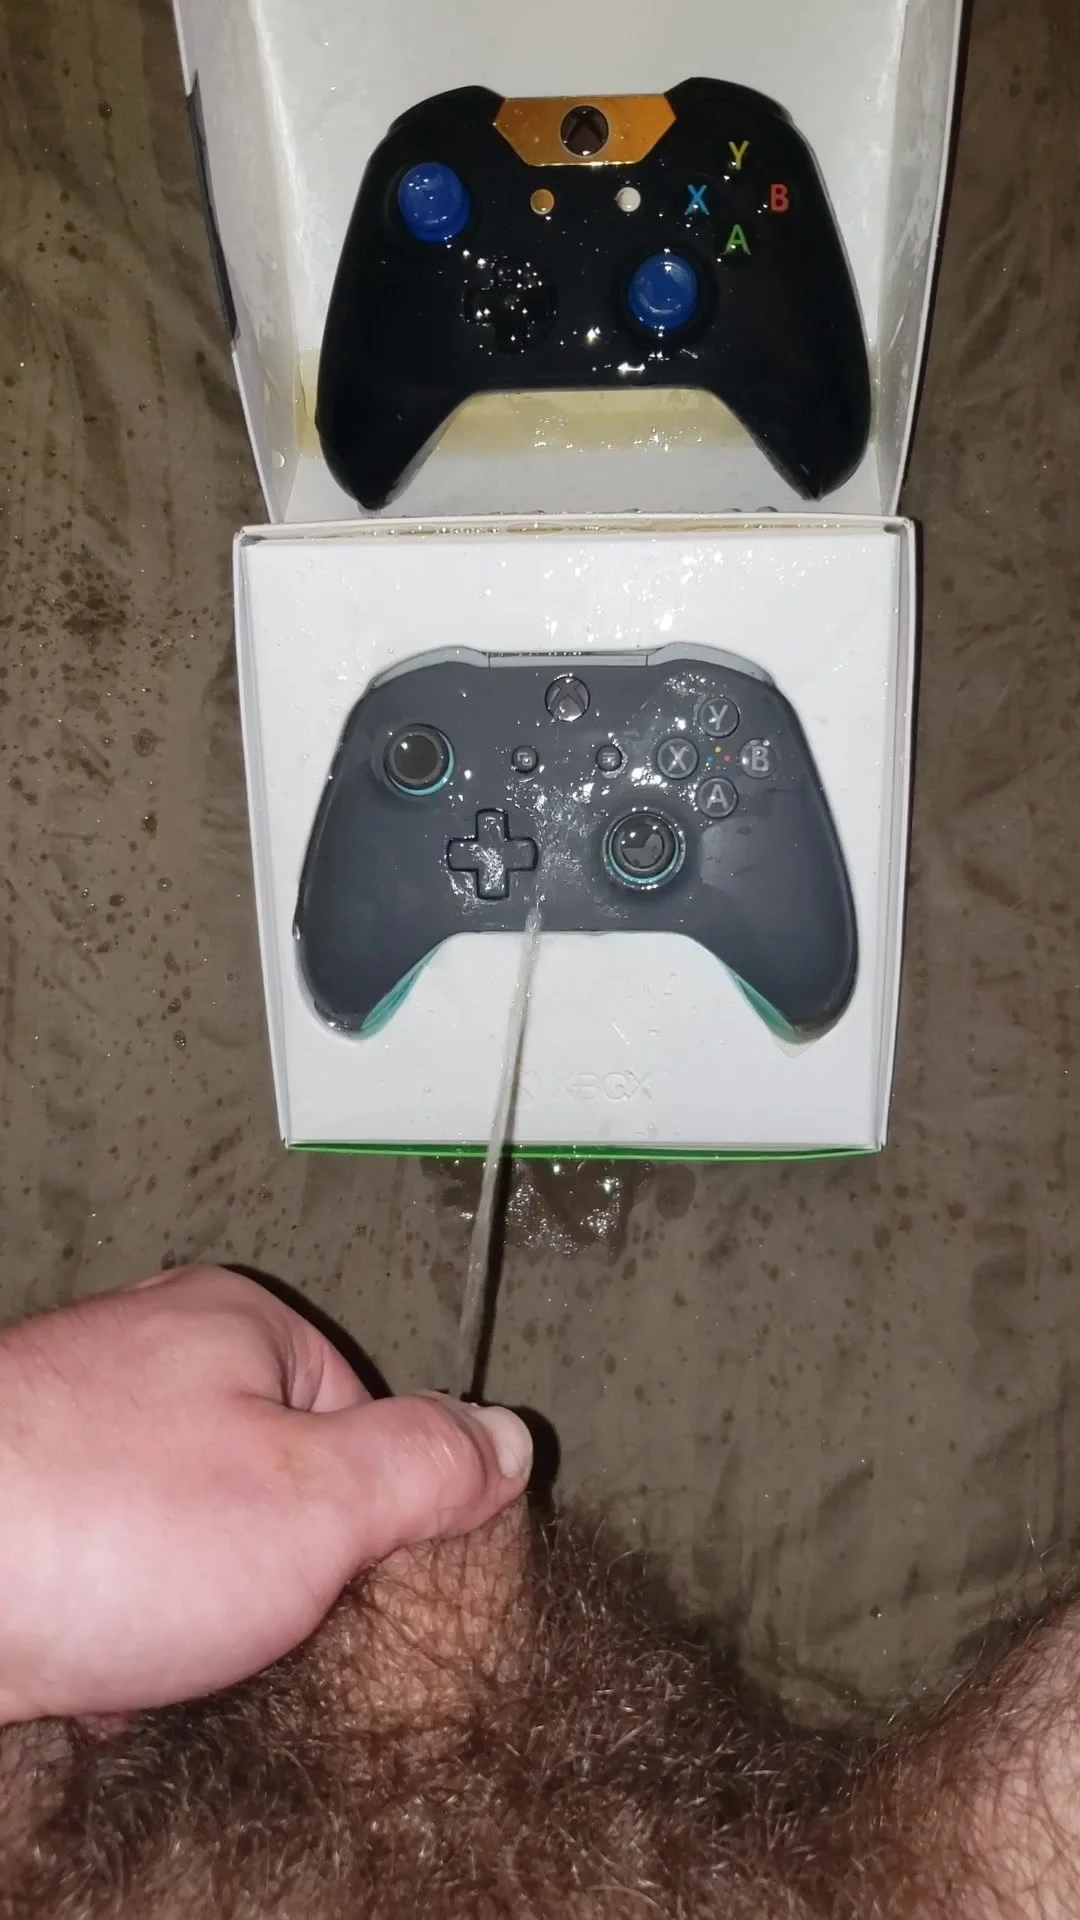 Piss on xbox controller - ThisVid.com